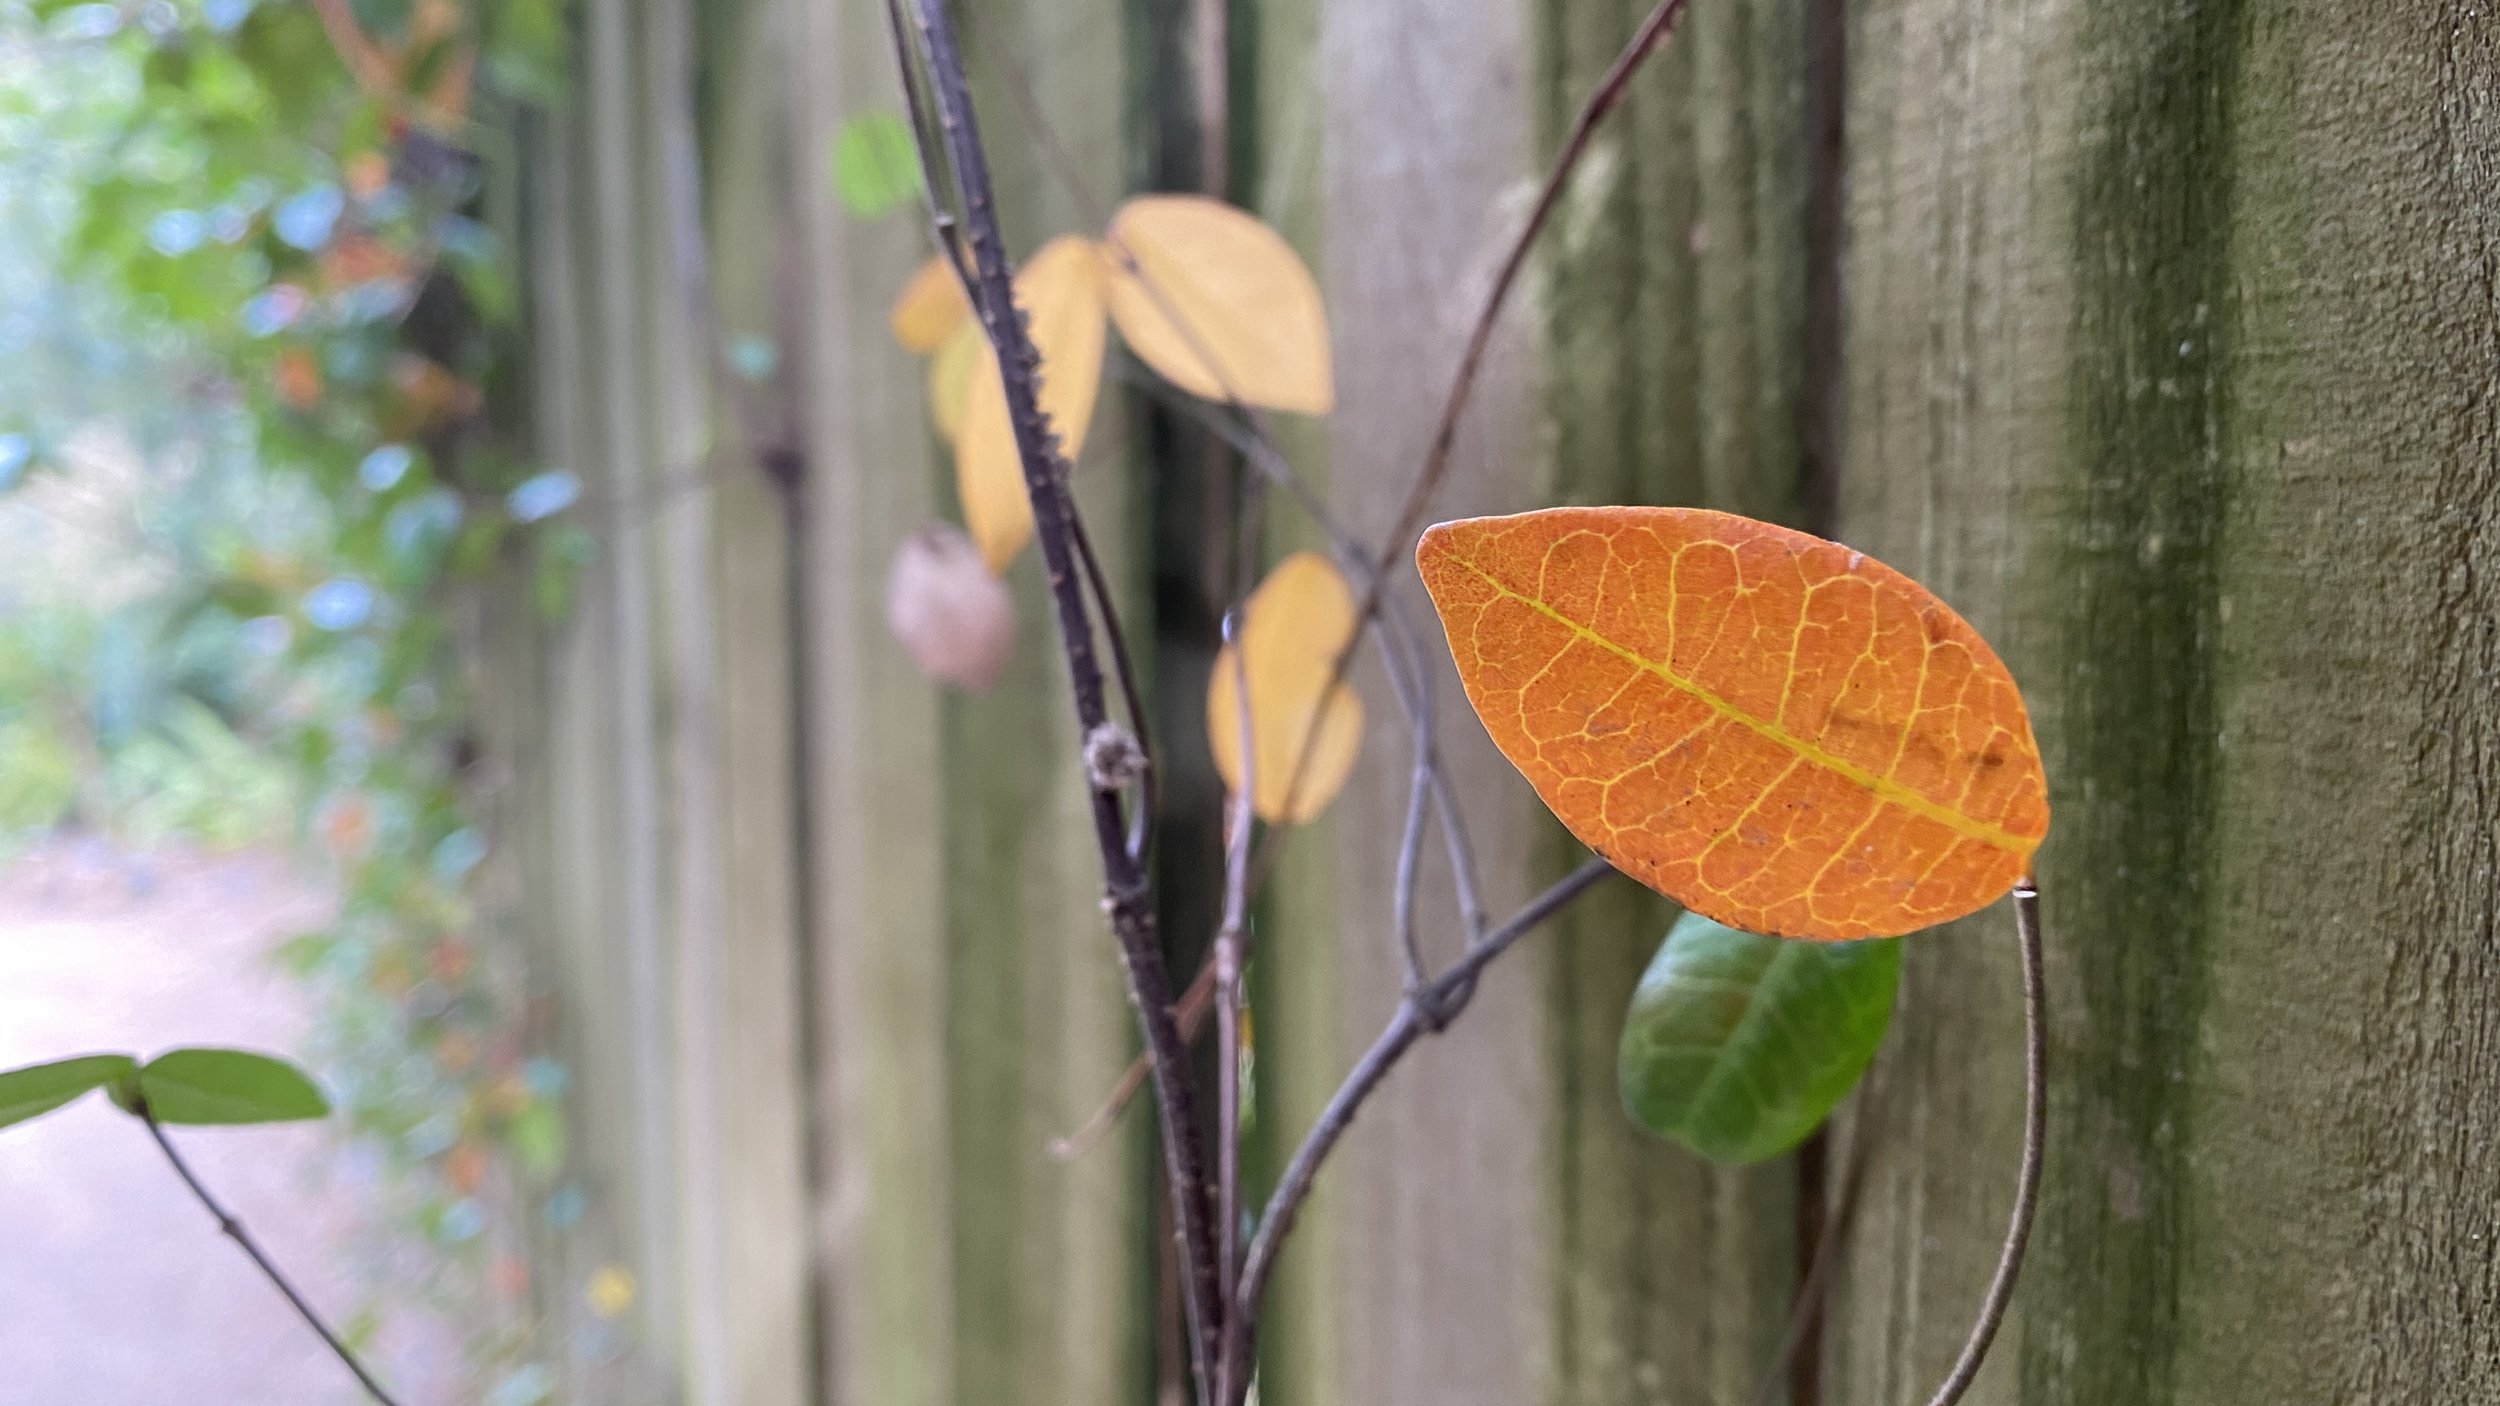  Even evergreen plants can have fall color, as witnessed in this brilliantly warm leaf of  Jasminum asiaticum  (Asiatic jasmine). 